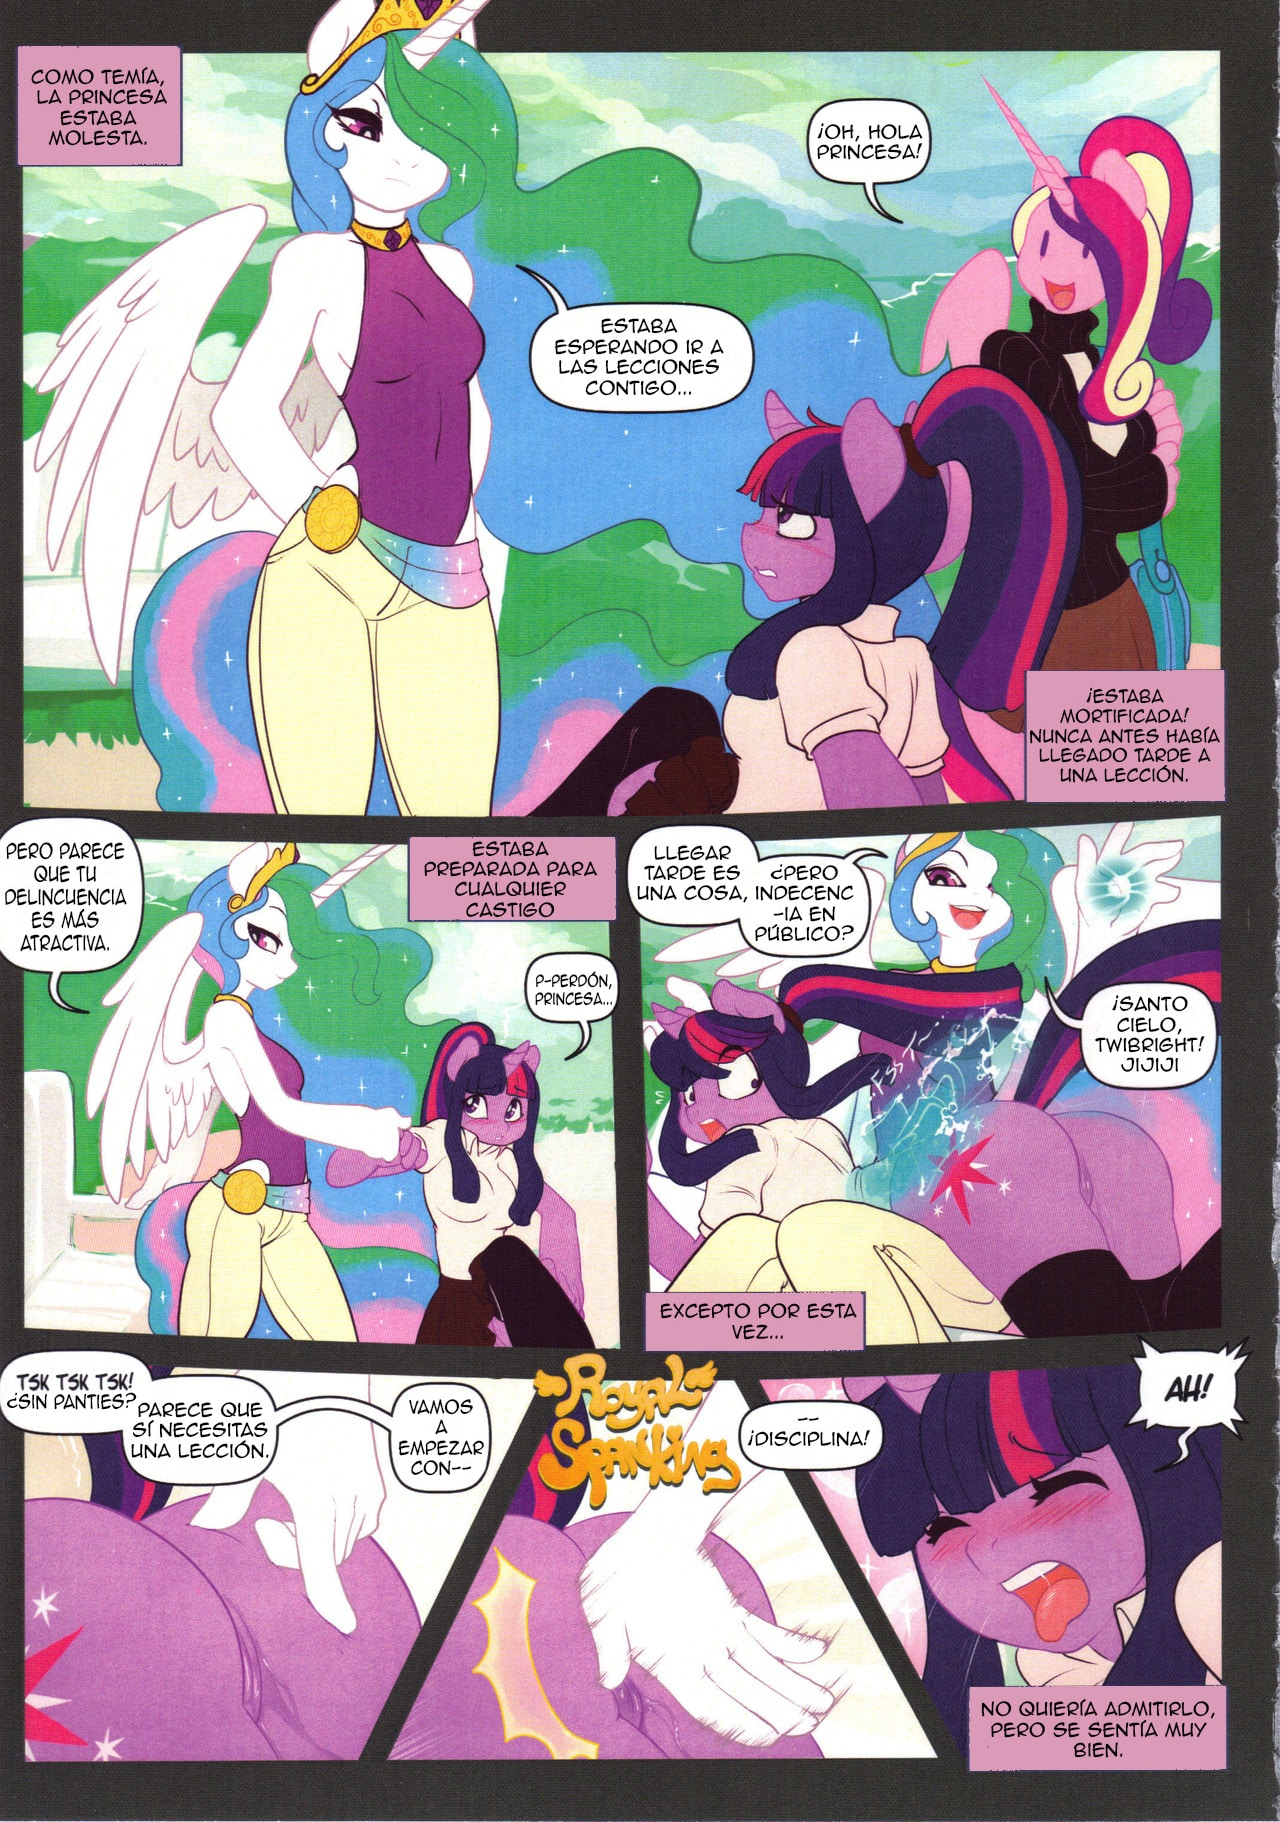 Private Lesson – My Little Pony - 9f27131301d9b6baaf4e45ed88a57bde